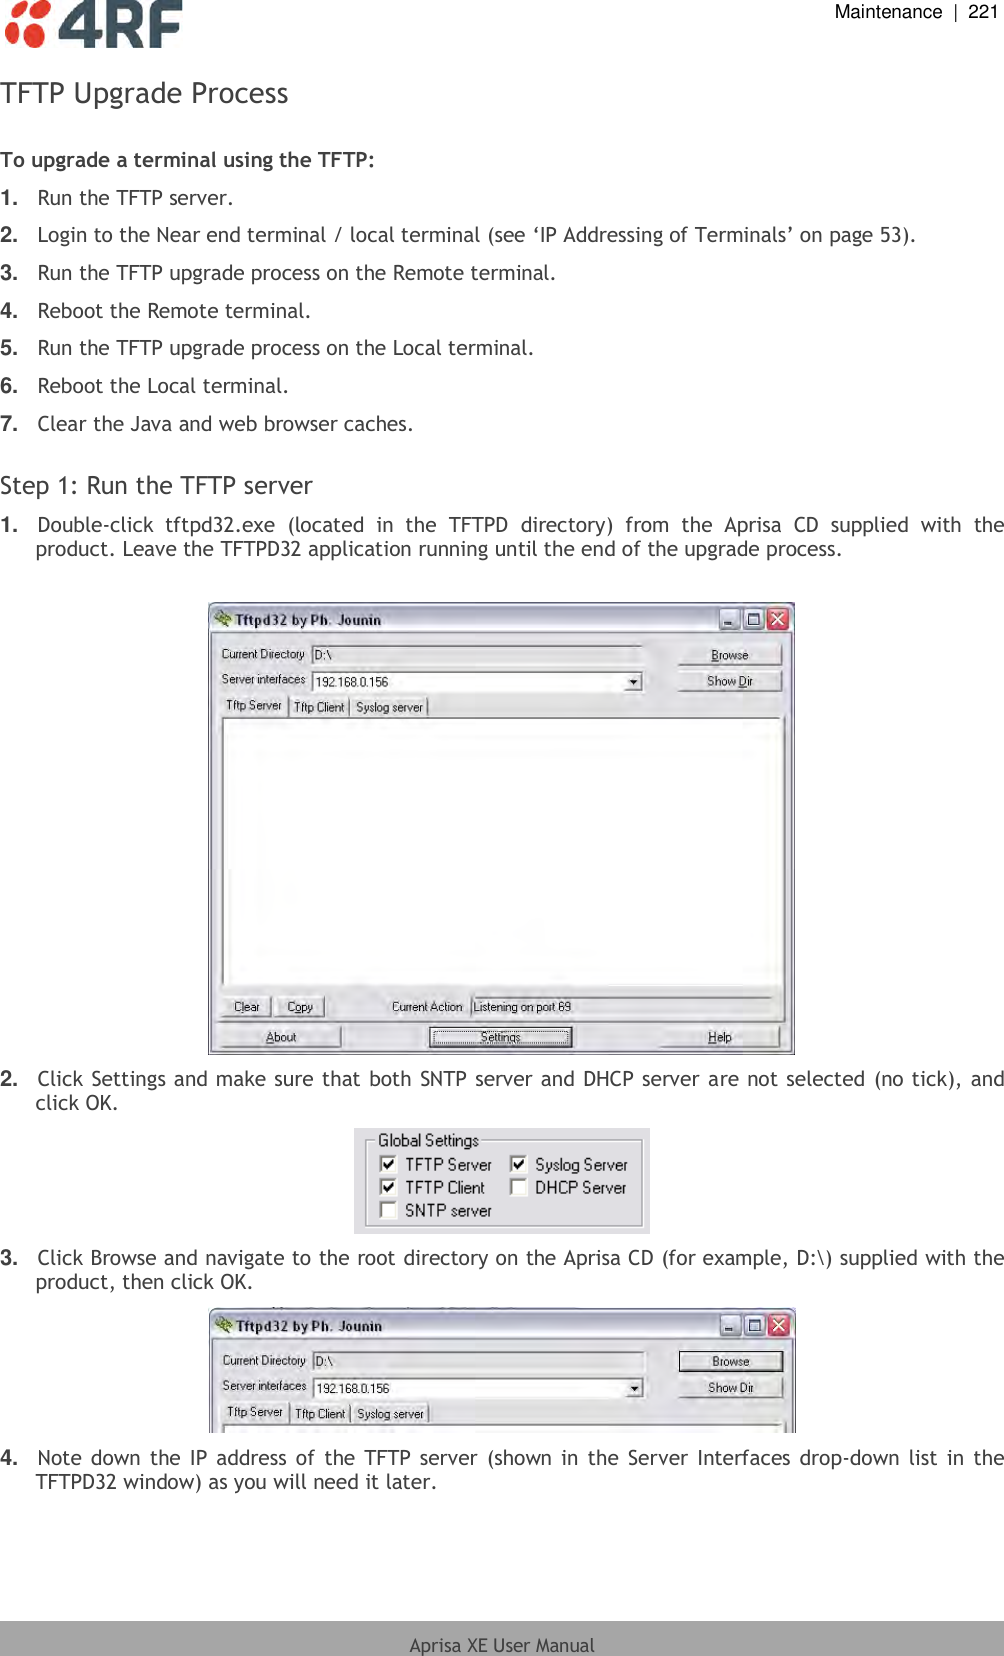  Maintenance  |  221  Aprisa XE User Manual  TFTP Upgrade Process  To upgrade a terminal using the TFTP: 1. Run the TFTP server. 2. Login to the Near end terminal / local terminal (see ‘IP Addressing of Terminals’ on page 53). 3. Run the TFTP upgrade process on the Remote terminal. 4. Reboot the Remote terminal. 5. Run the TFTP upgrade process on the Local terminal. 6. Reboot the Local terminal. 7. Clear the Java and web browser caches.  Step 1: Run the TFTP server 1. Double-click  tftpd32.exe  (located  in  the  TFTPD  directory)  from  the  Aprisa  CD  supplied  with  the product. Leave the TFTPD32 application running until the end of the upgrade process.   2. Click Settings and make sure that both SNTP server and DHCP server are not selected (no tick), and click OK.  3. Click Browse and navigate to the root directory on the Aprisa CD (for example, D:\) supplied with the product, then click OK.  4. Note down the IP address of  the TFTP  server (shown in the Server  Interfaces  drop-down list in  the TFTPD32 window) as you will need it later. 